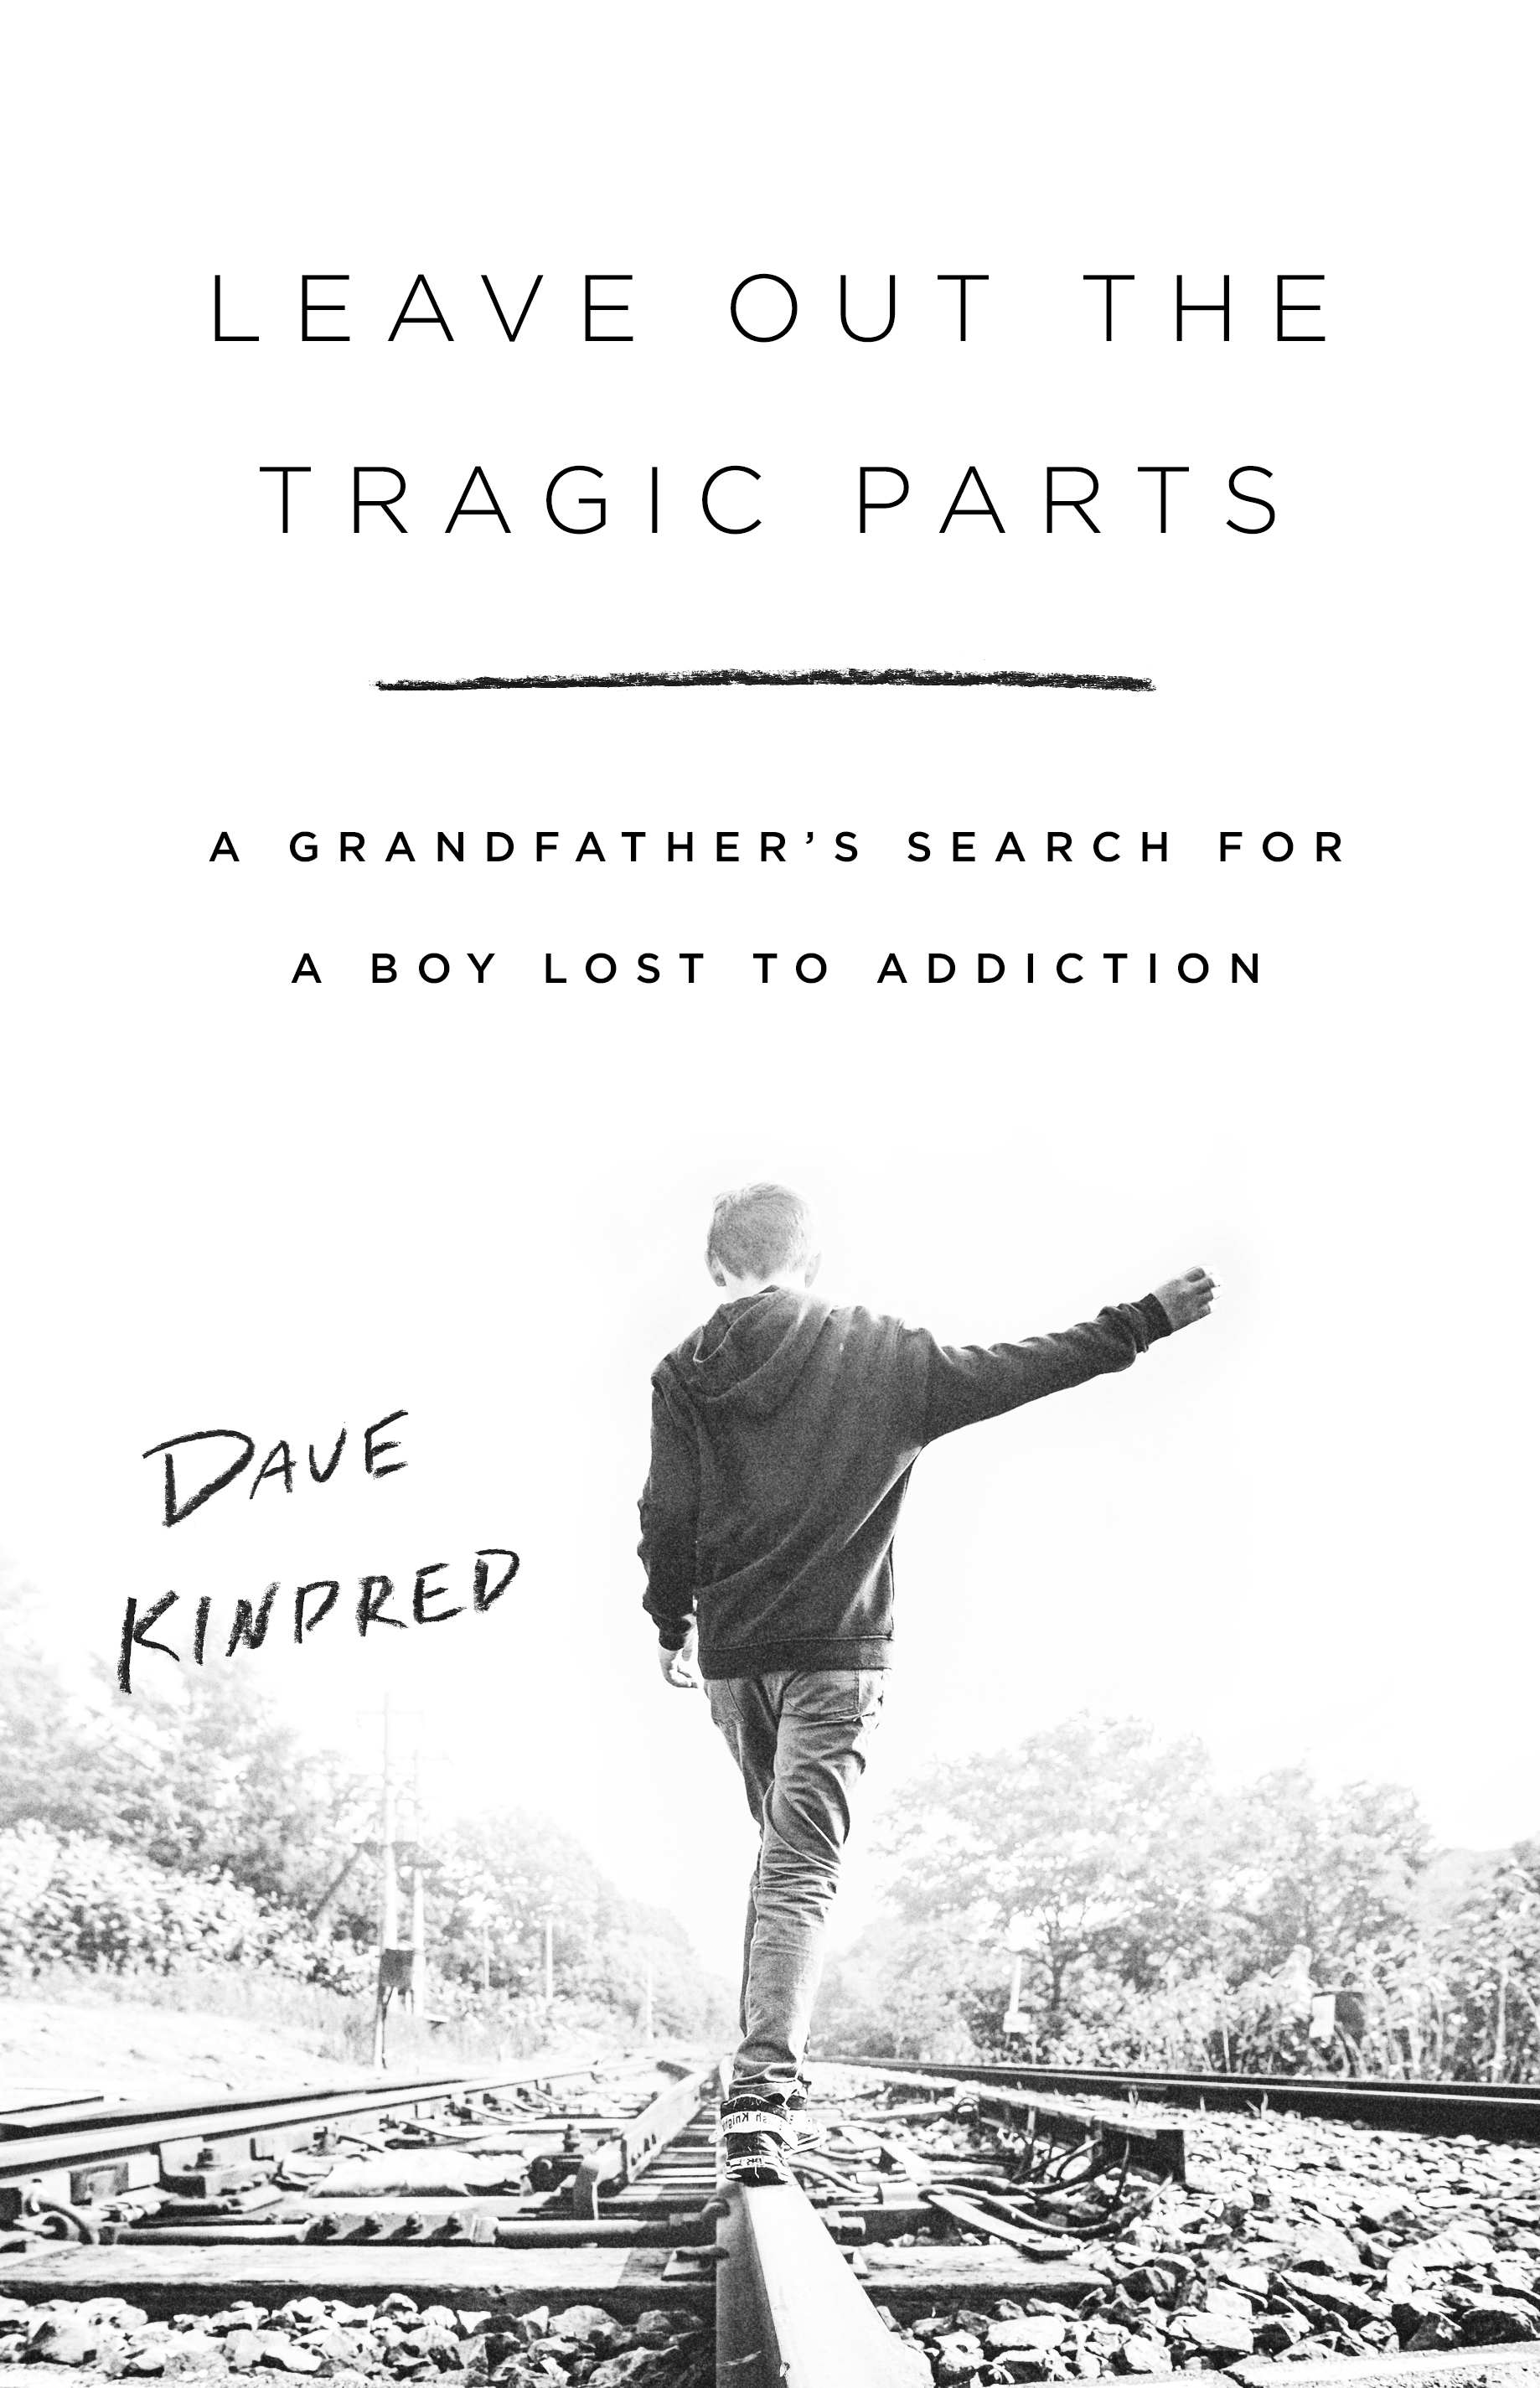 Virtual event with Dave Kindred/Leave Out the Tragic Parts